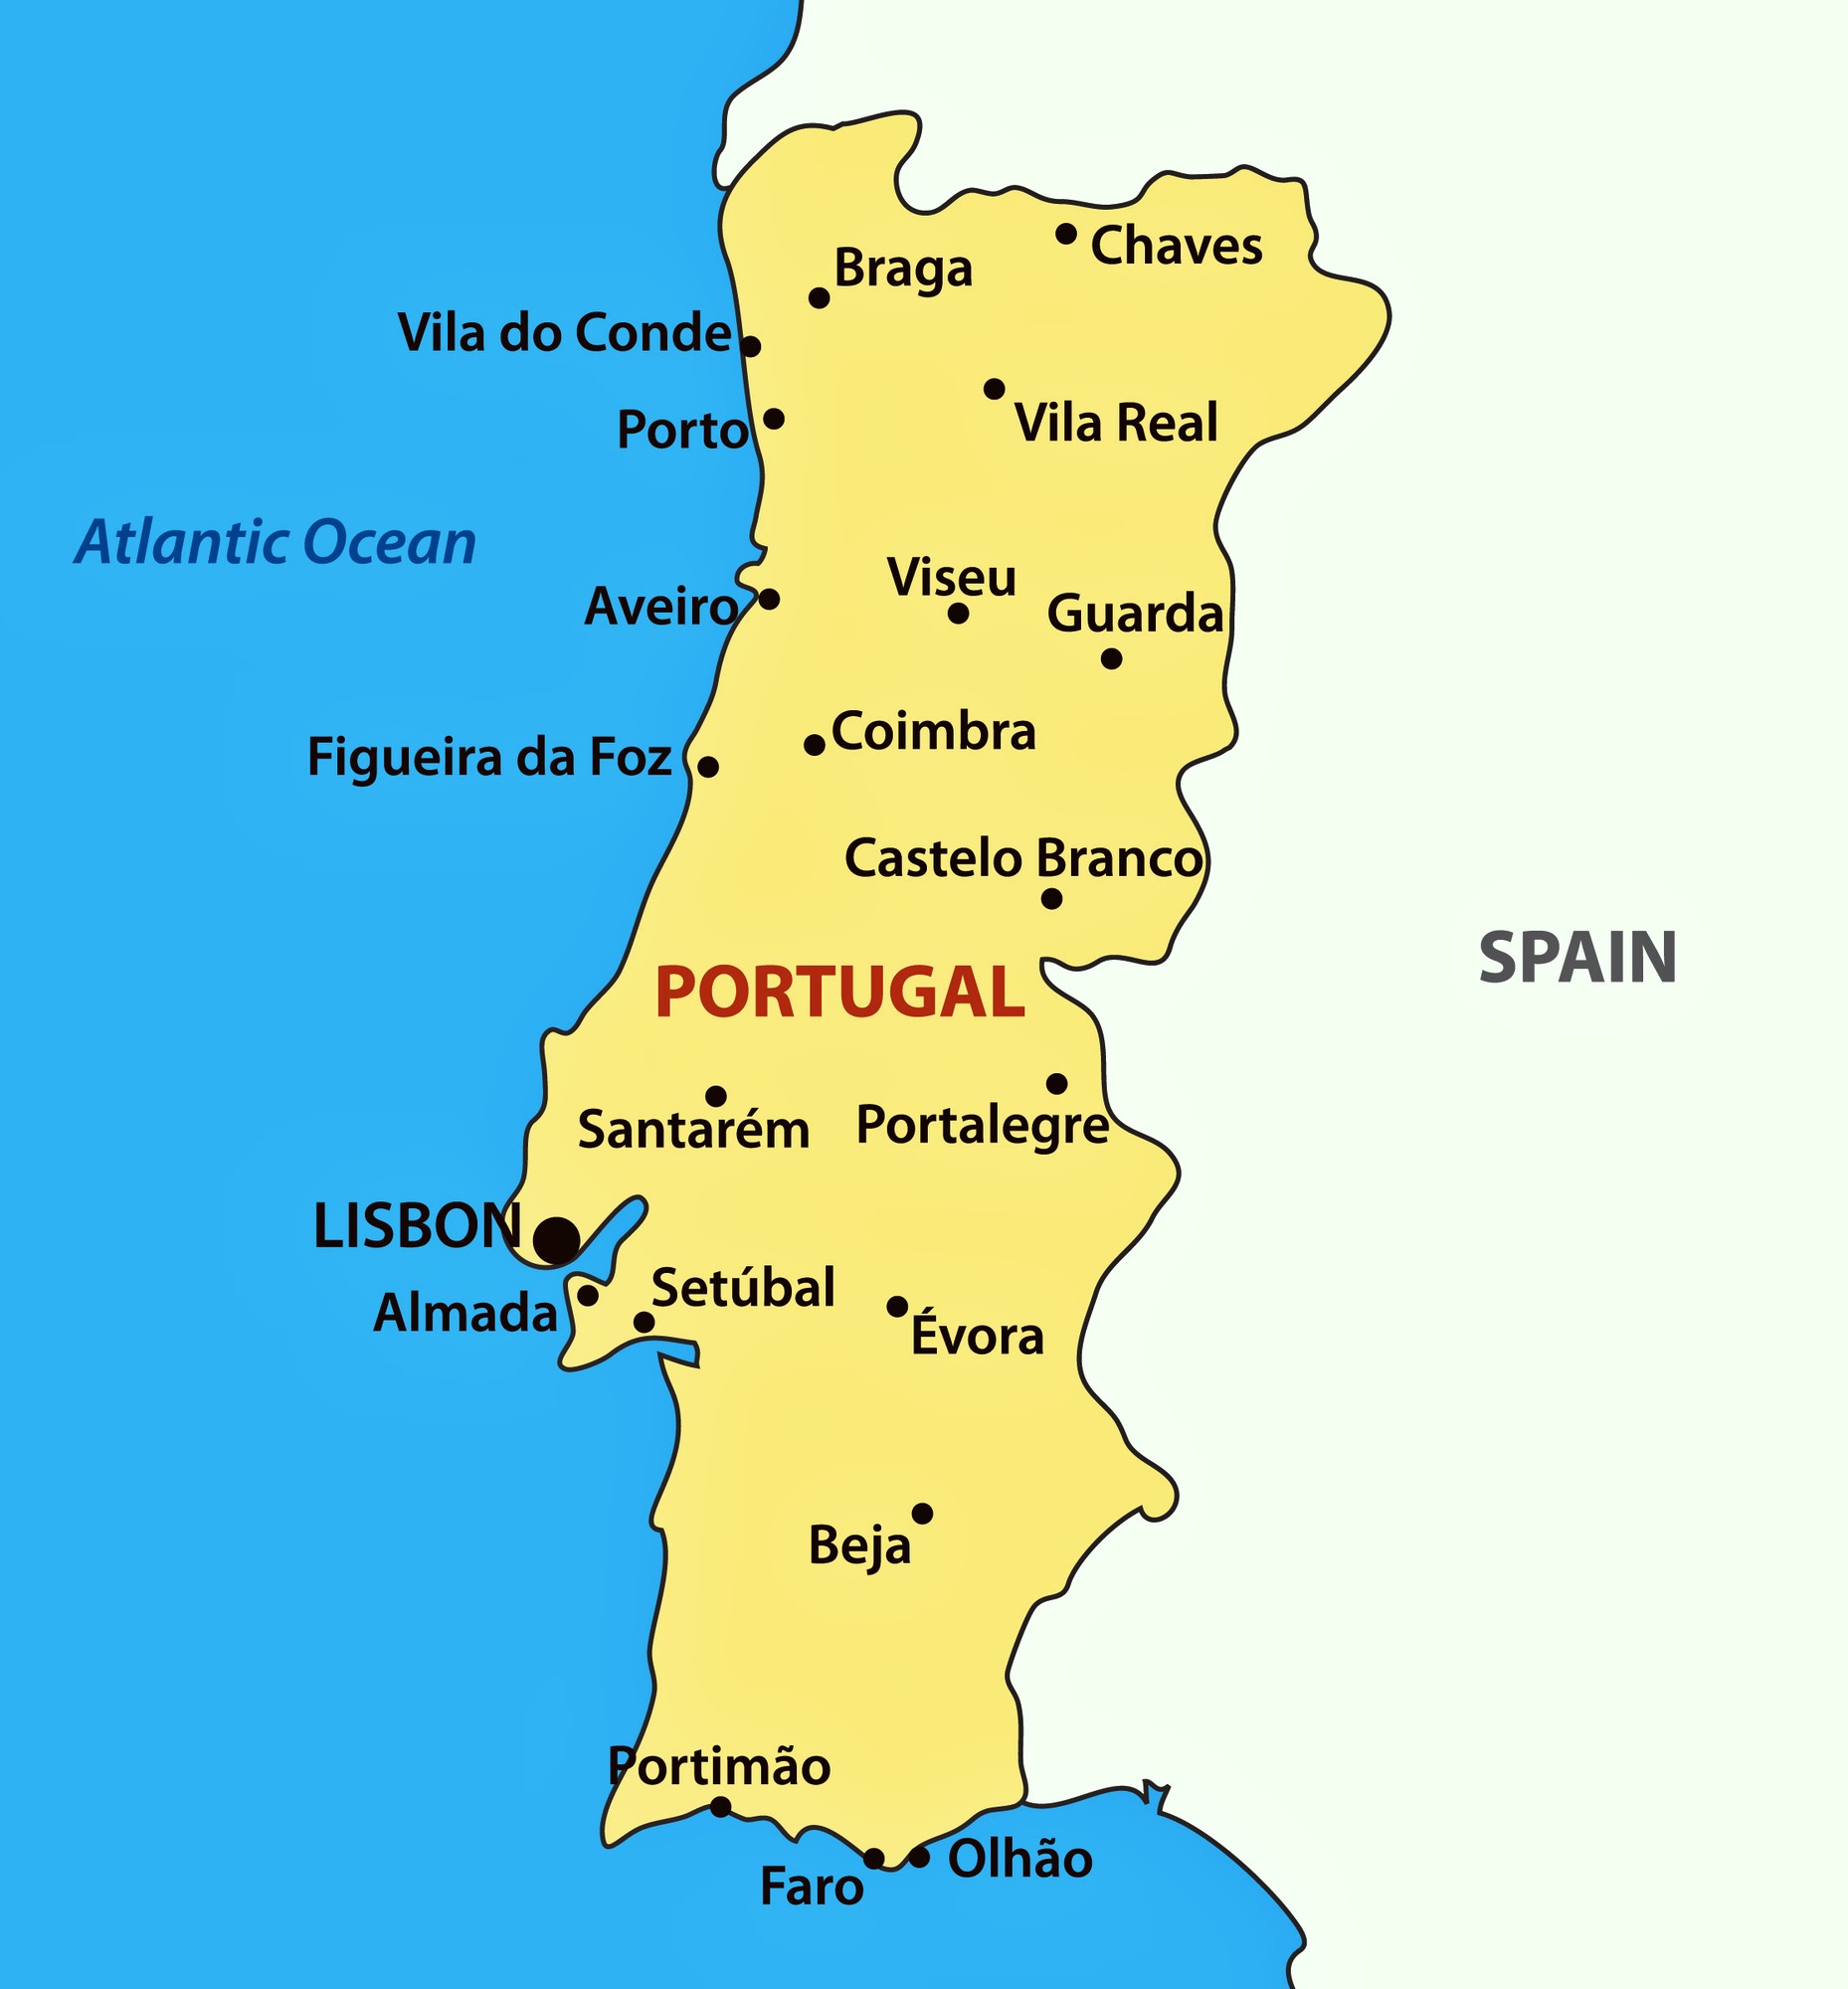 Map of Portugal - Full size